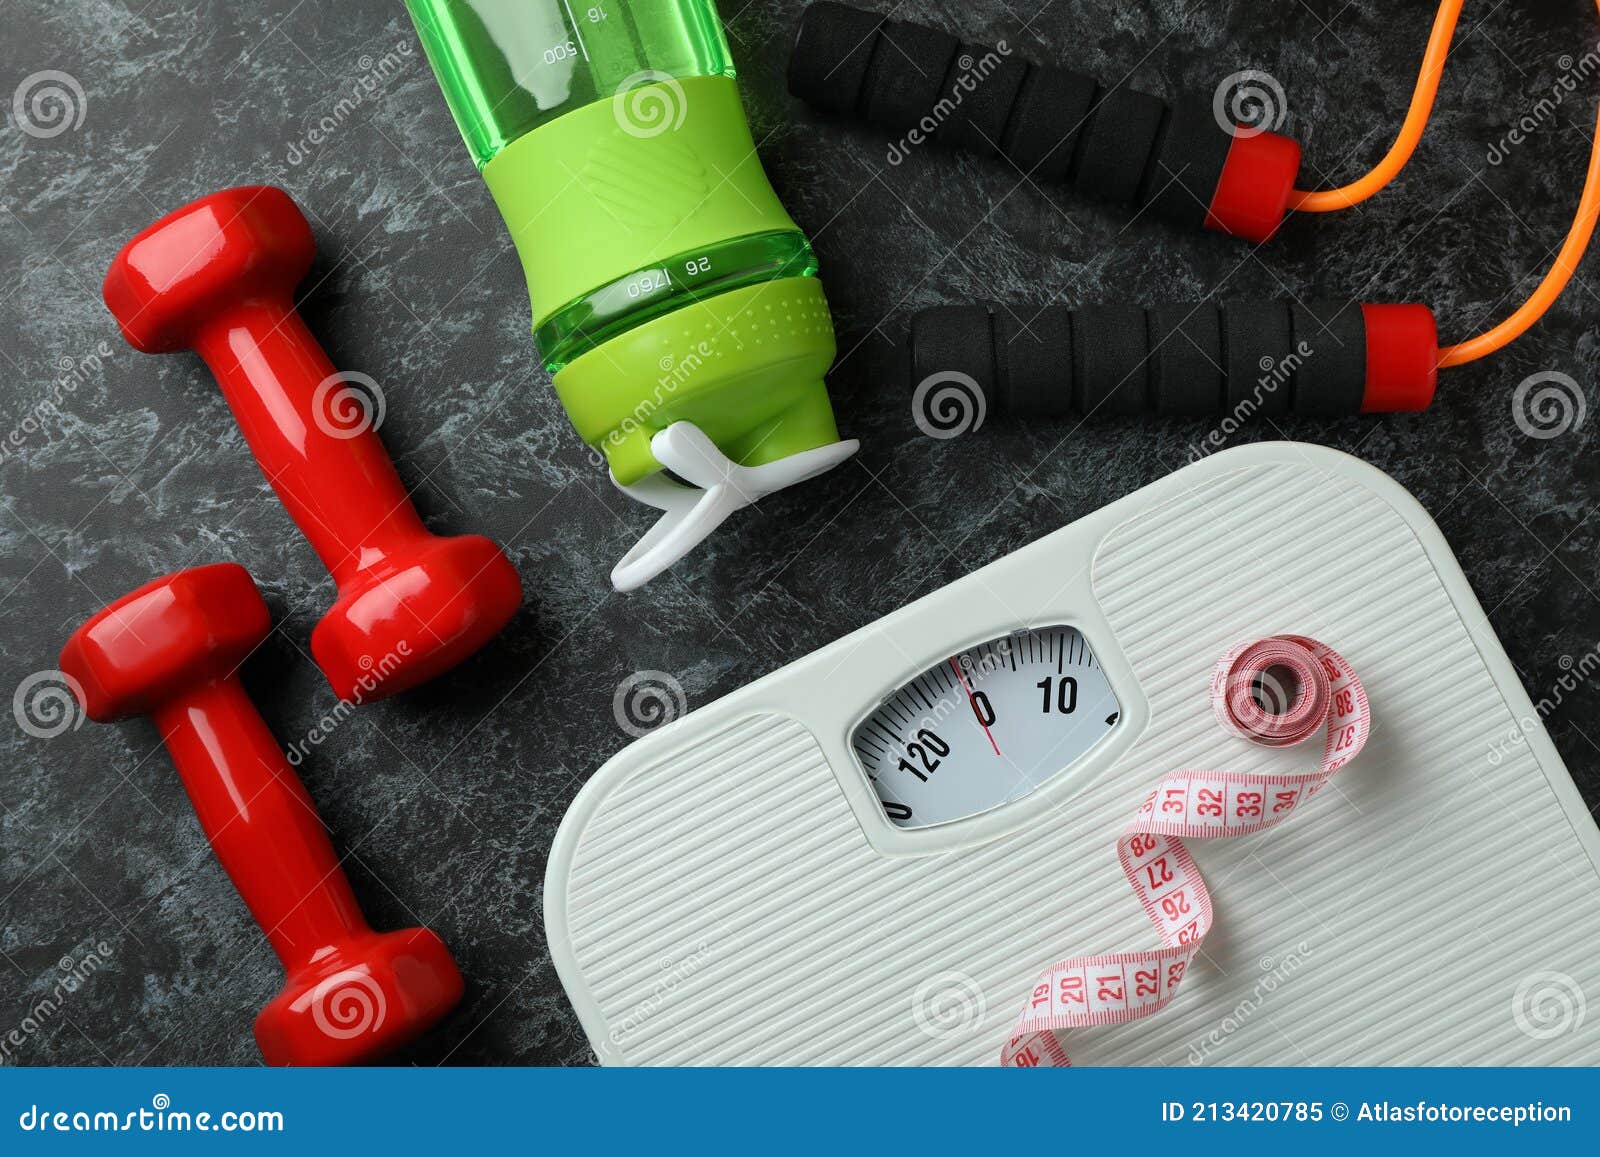 https://thumbs.dreamstime.com/z/weight-loss-accessories-black-smoky-background-top-view-weight-loss-accessories-black-smoky-background-top-view-213420785.jpg